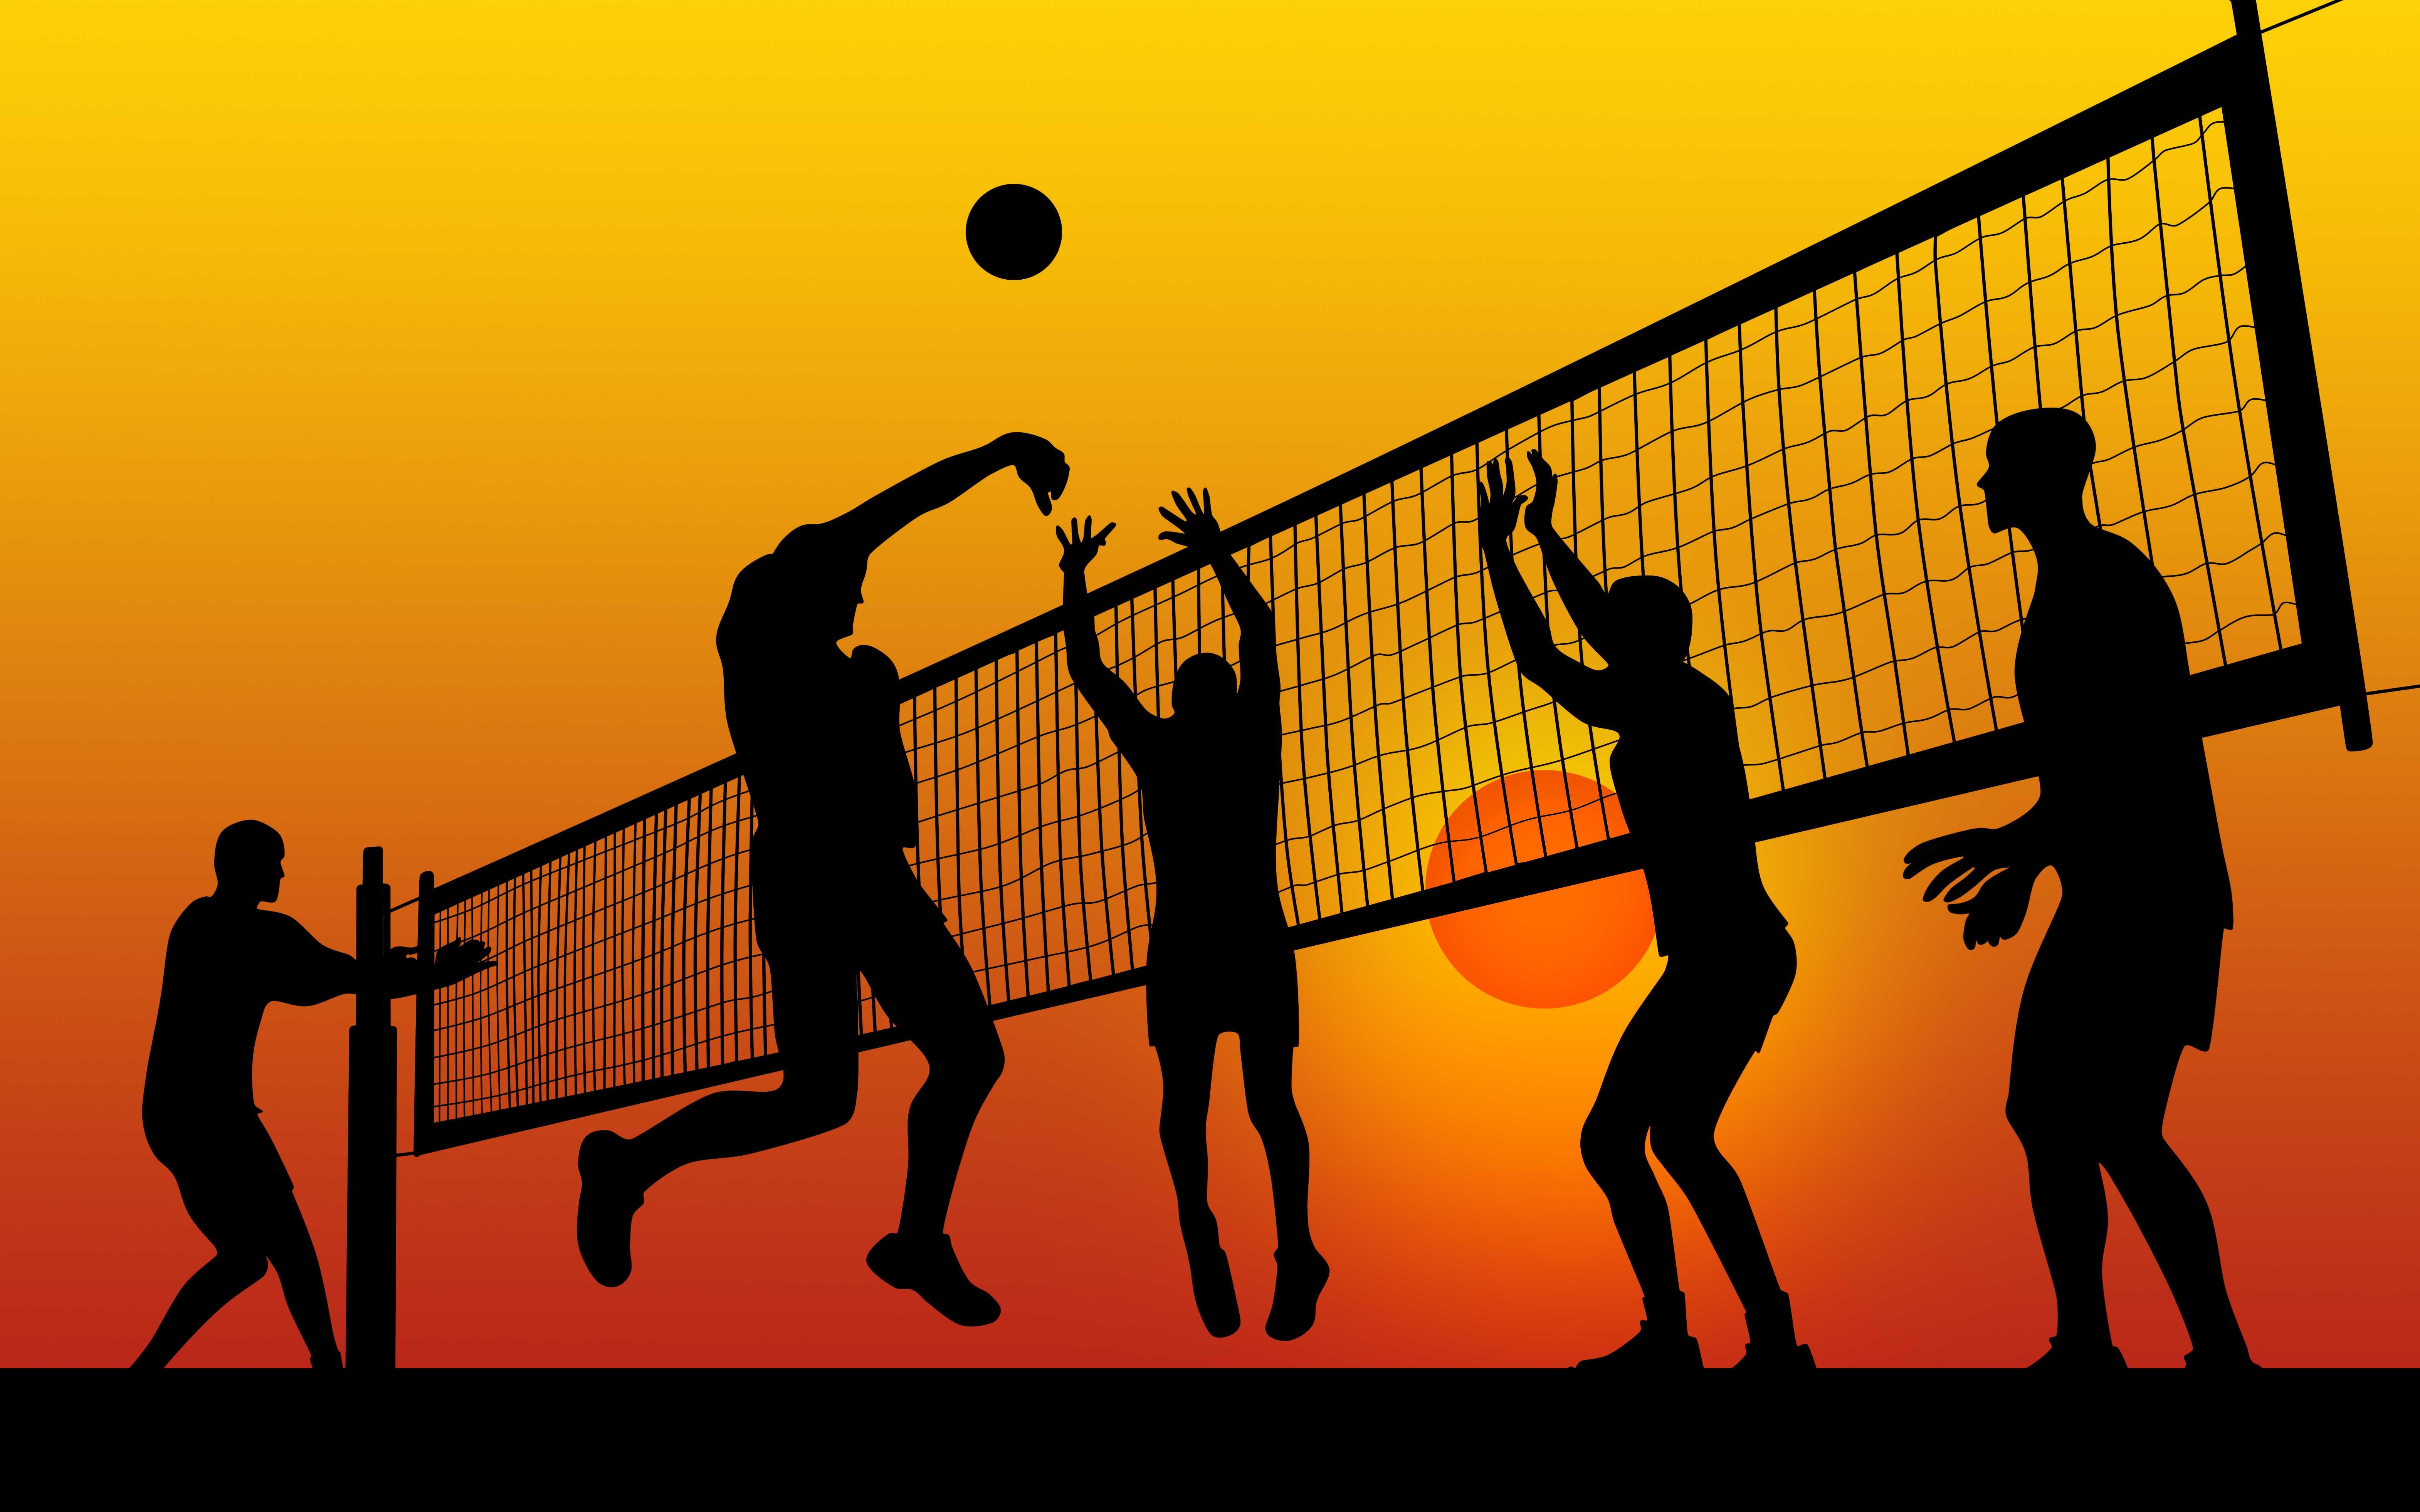 Silhouette of a group of people playing beach volleyball - Volleyball